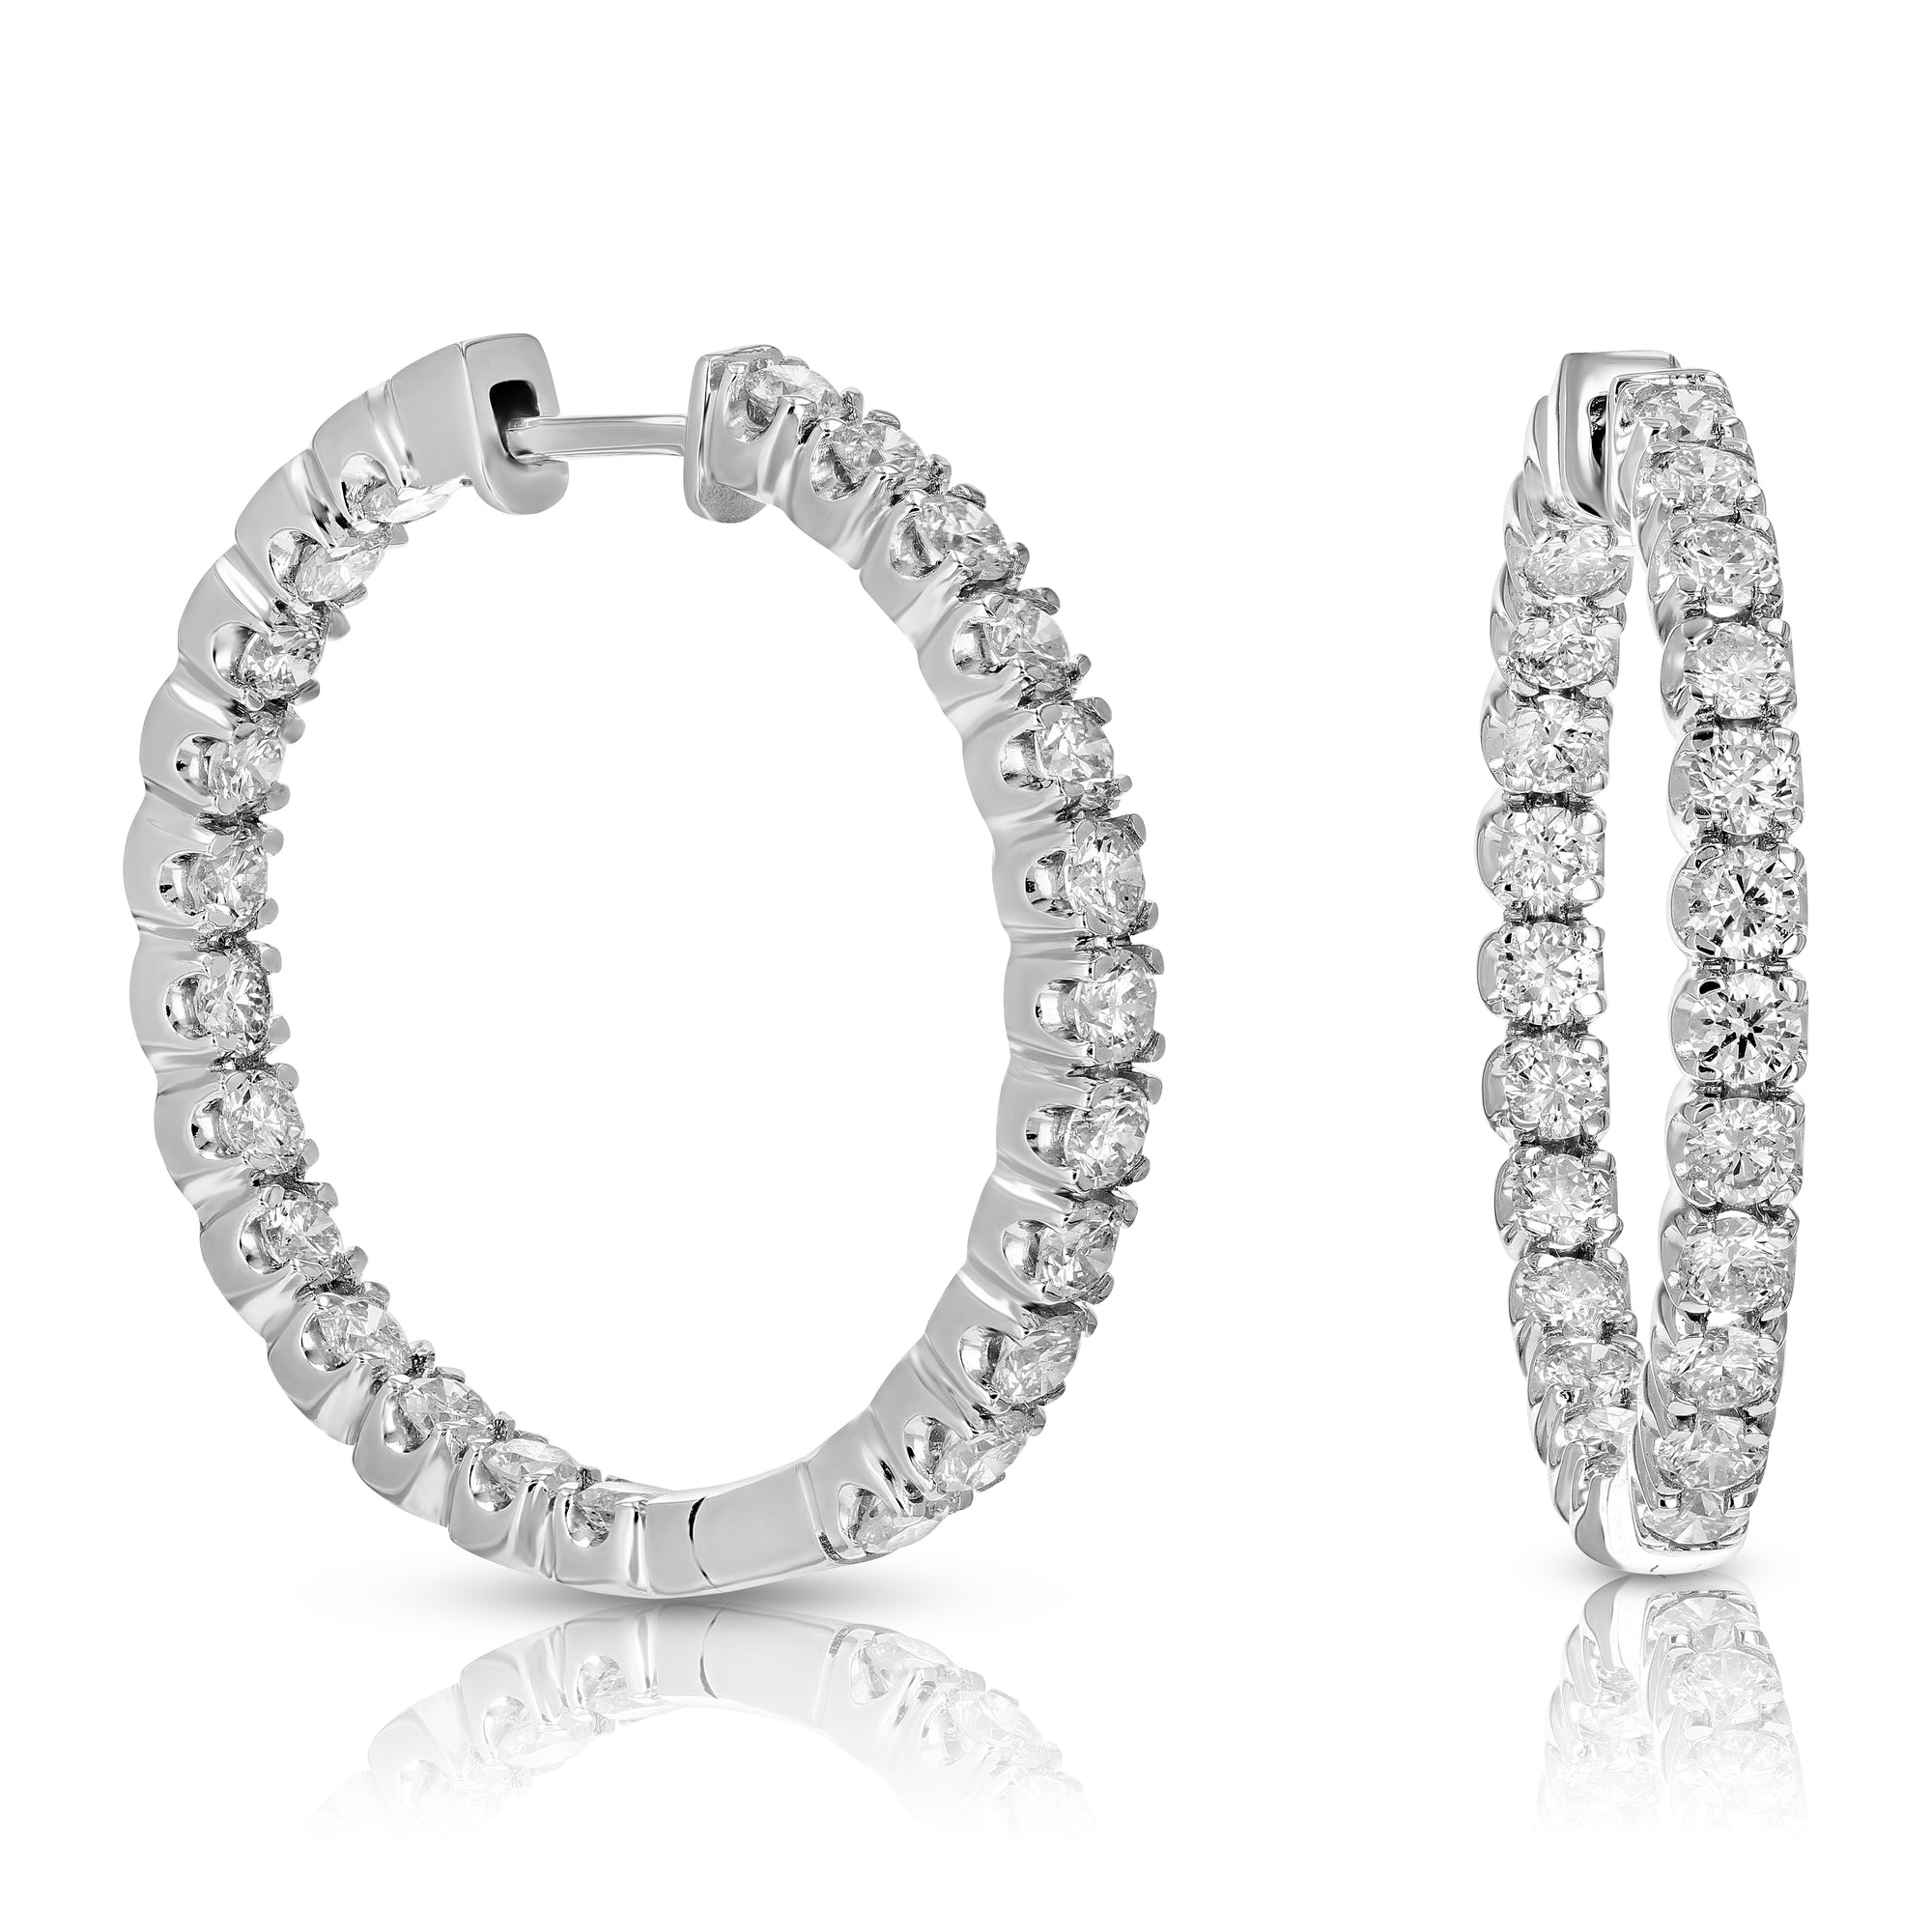 5 cttw Diamond Inside Out Hoop Earrings 14K White Gold Round Prong Set 1.38 inch